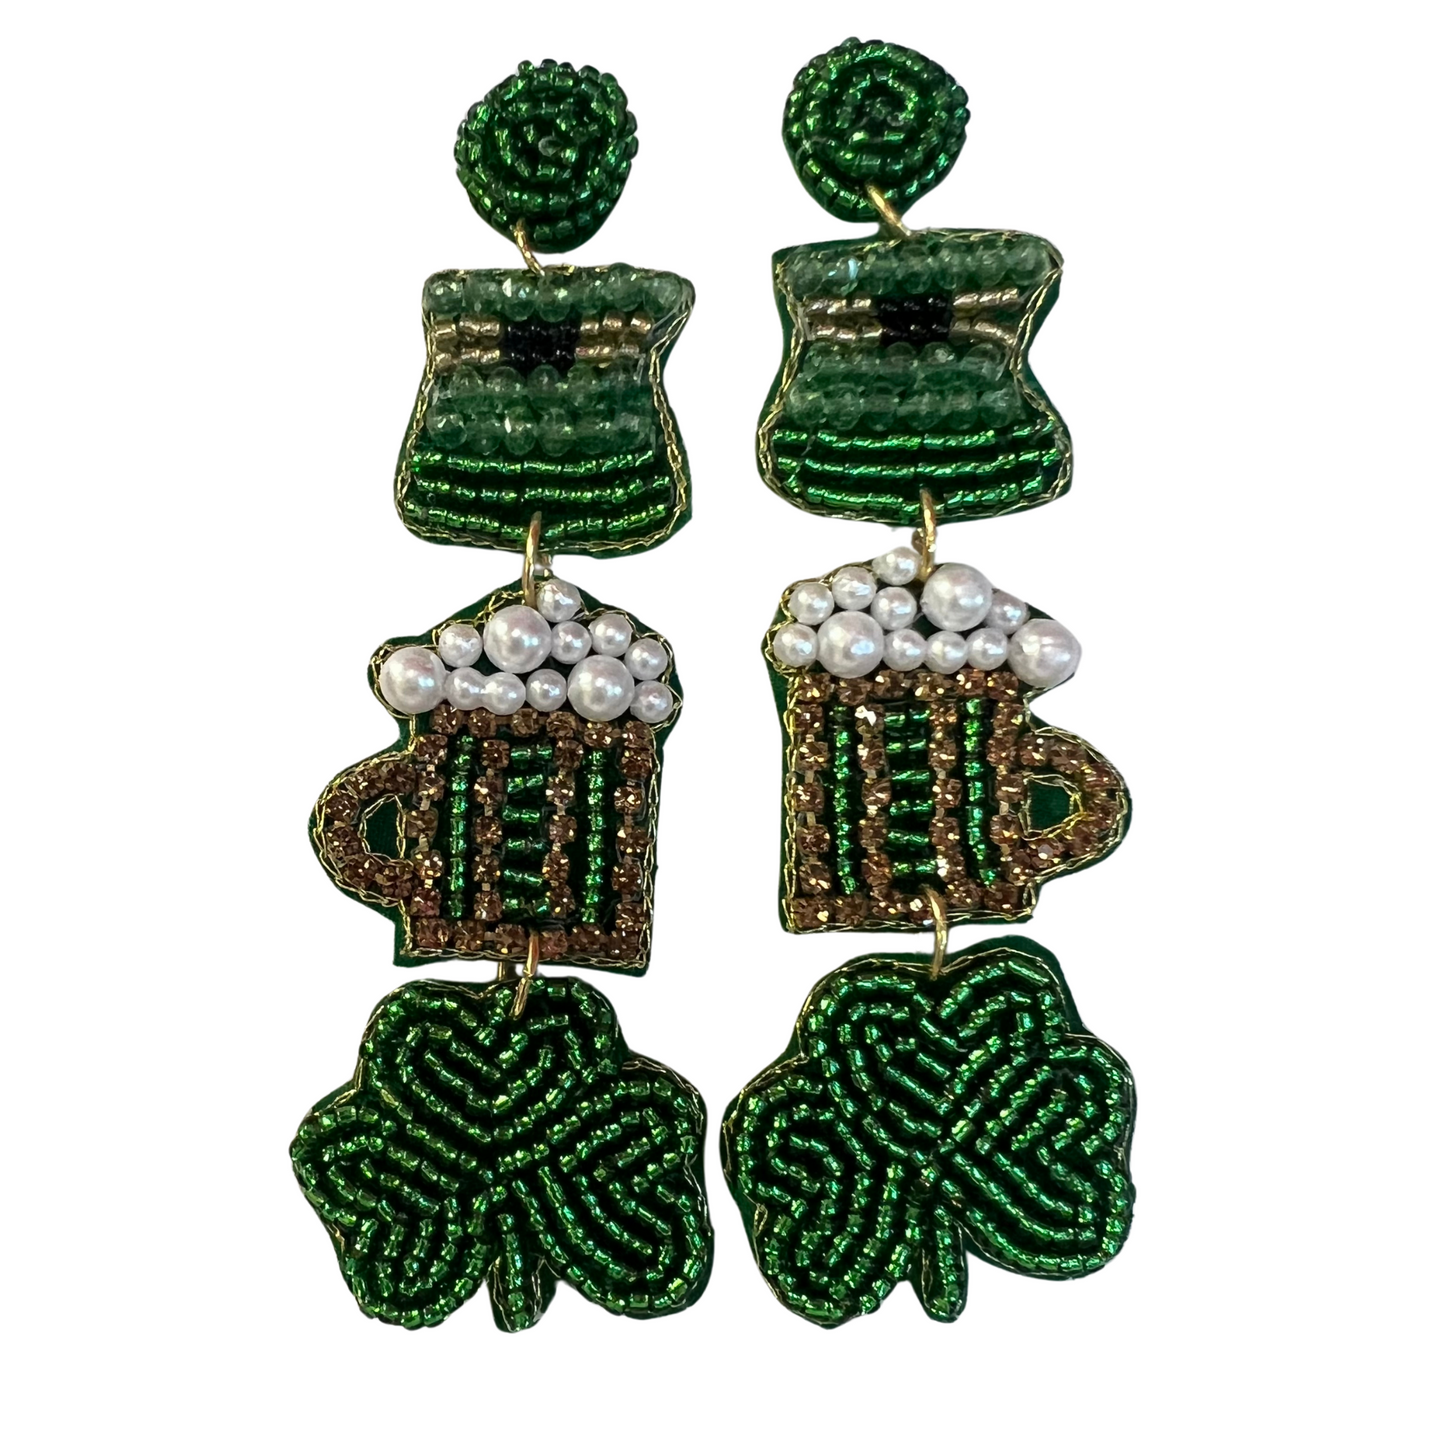 These stunning St. Patrick's Day earrings come in two distinct styles. Both feature gold and green beading, as well as beer mugs and lucky four-leaf clovers. Add a touch of luck to your outfit and celebrate the green with these beautiful accessories.